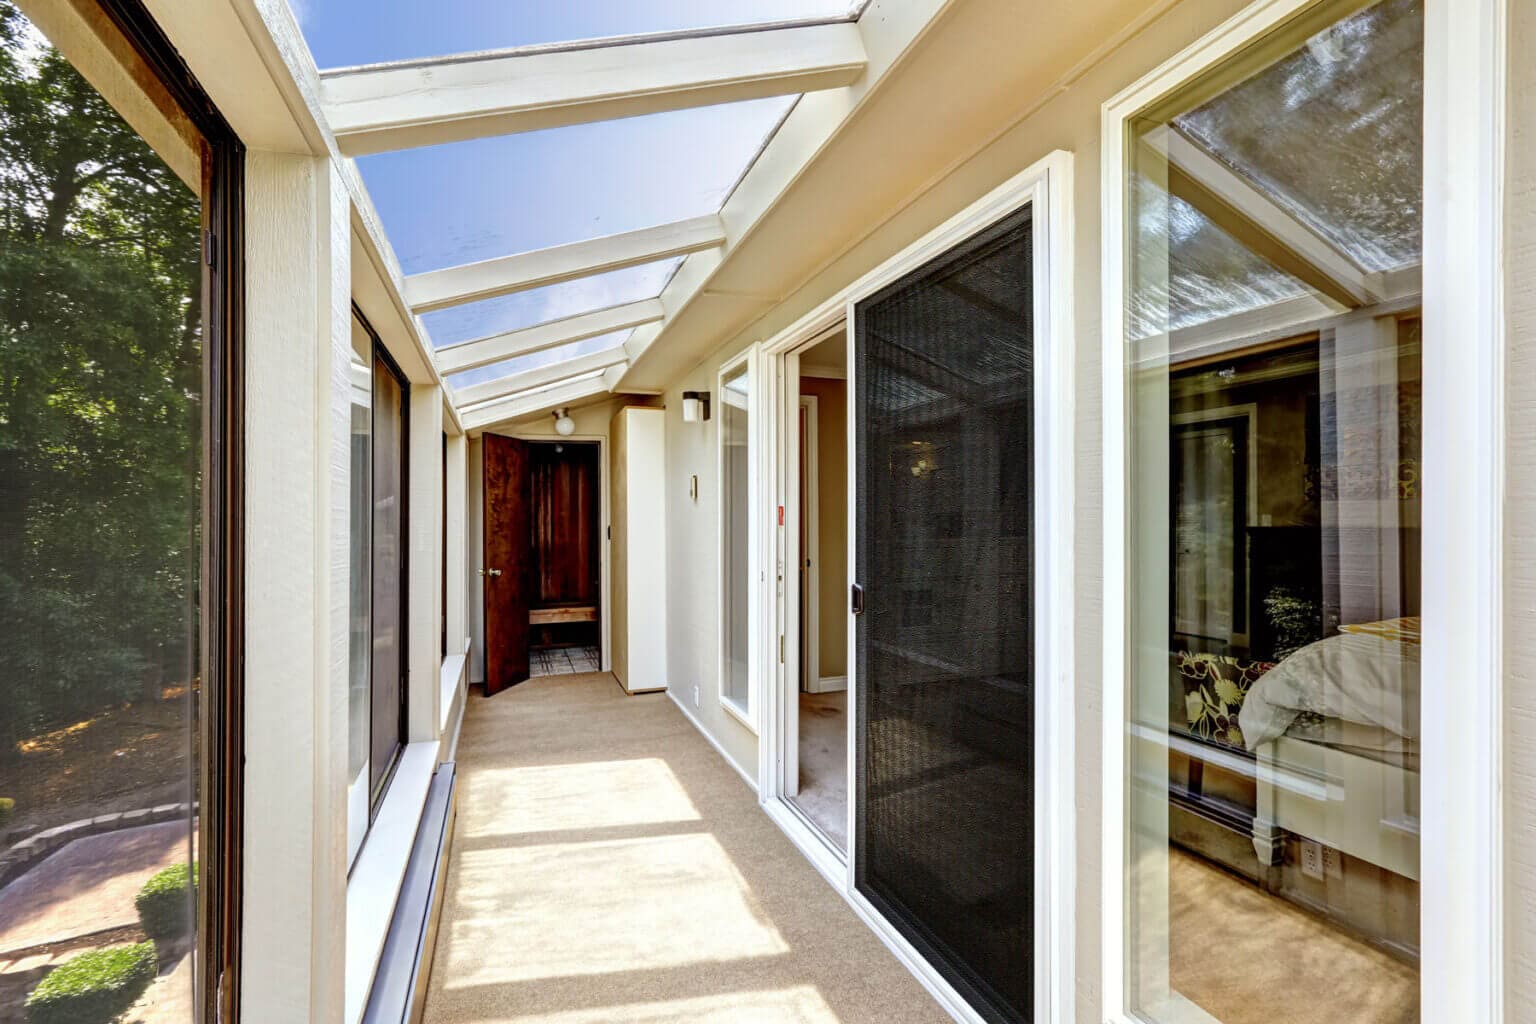 Top Flyscreens and Doors in Sydney - Quality Sydney Flyscreens and Doors Near me